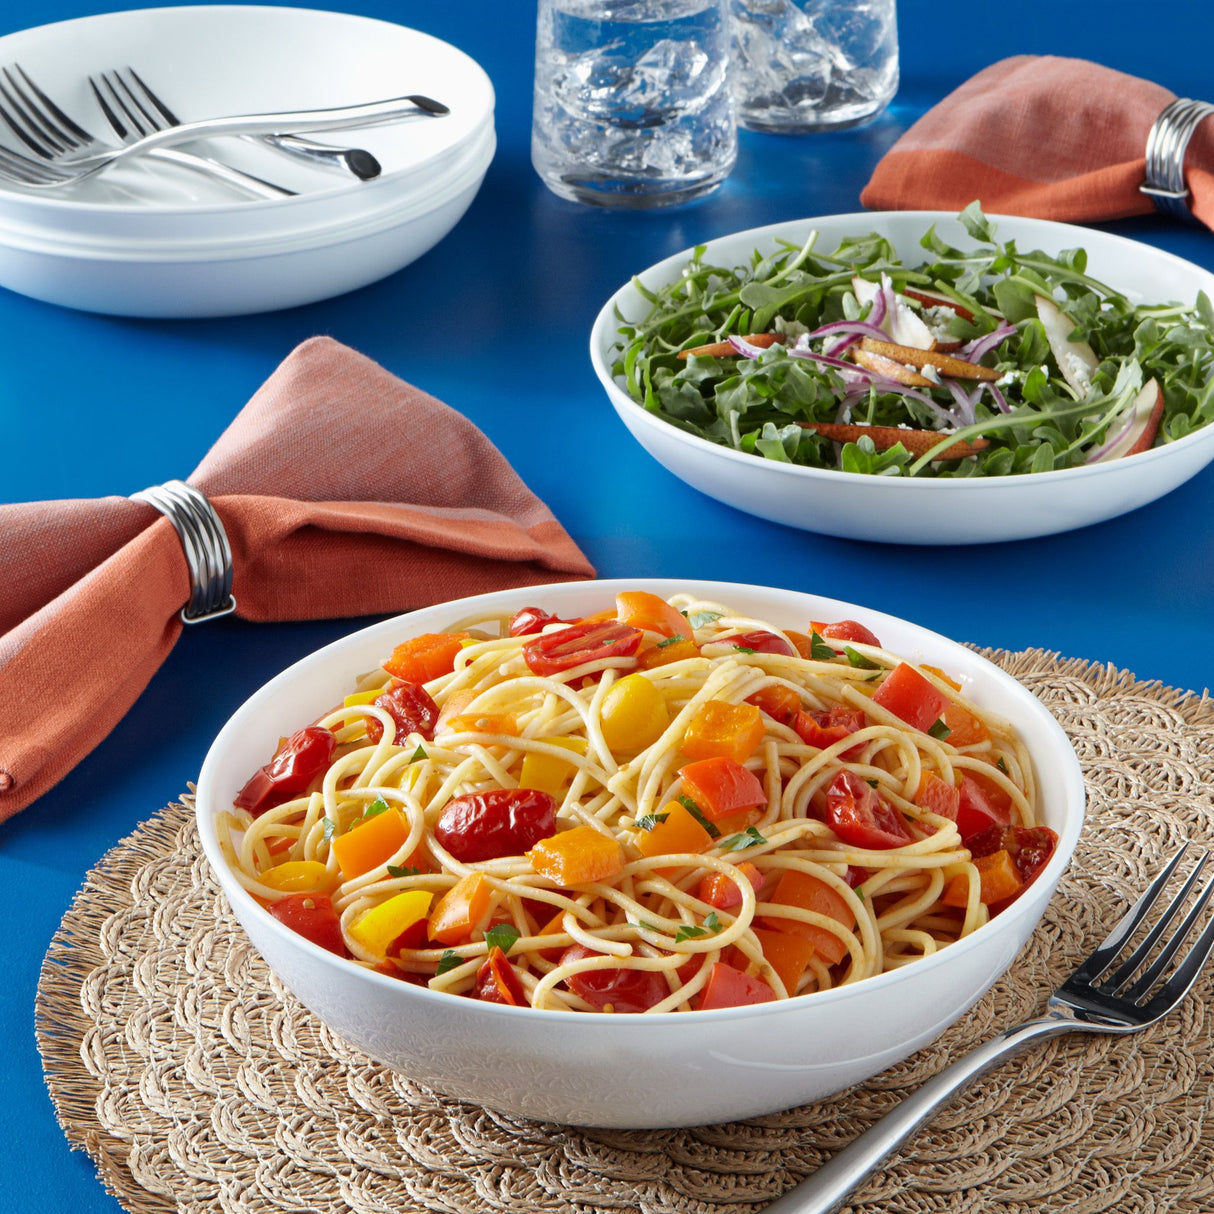  pasta with tomatoes on table with salad in a second bowl